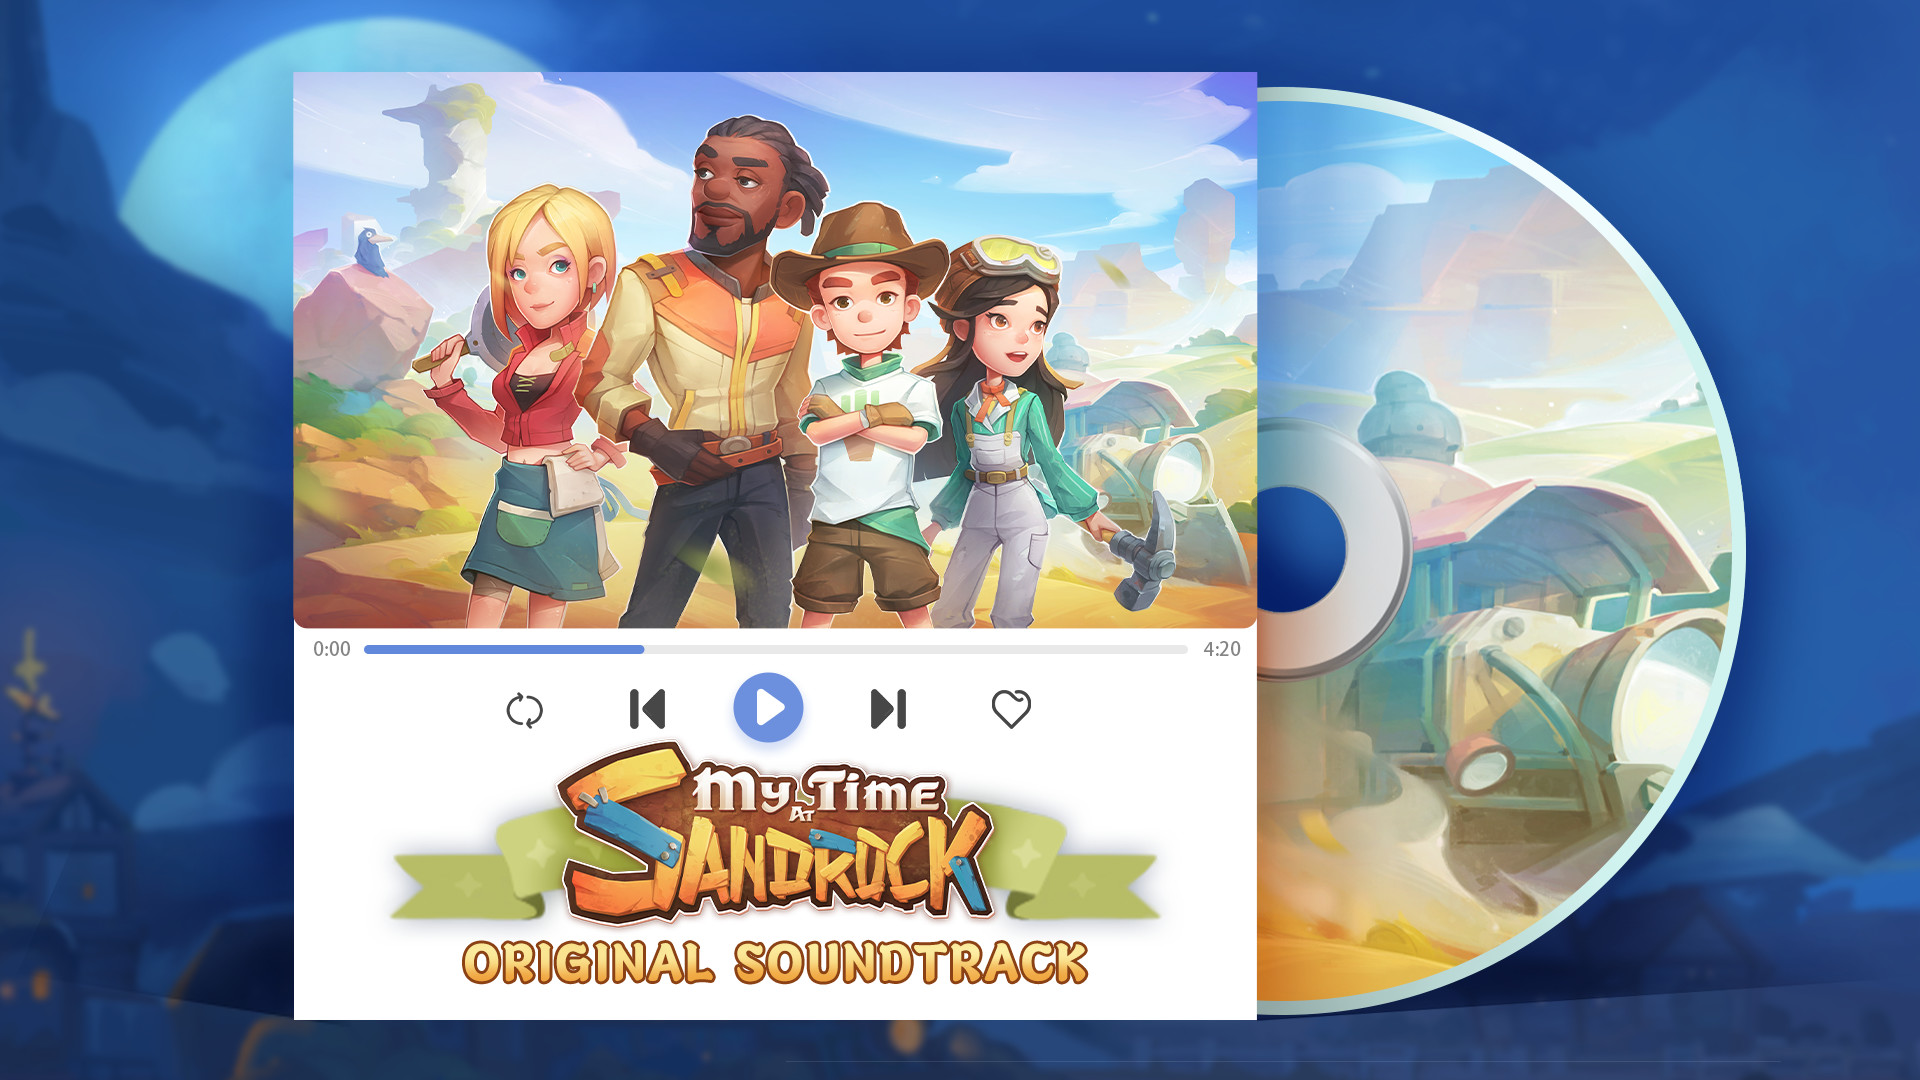 My Time at Sandrock - Original Soundtrack image from the DLC's Steam store page.